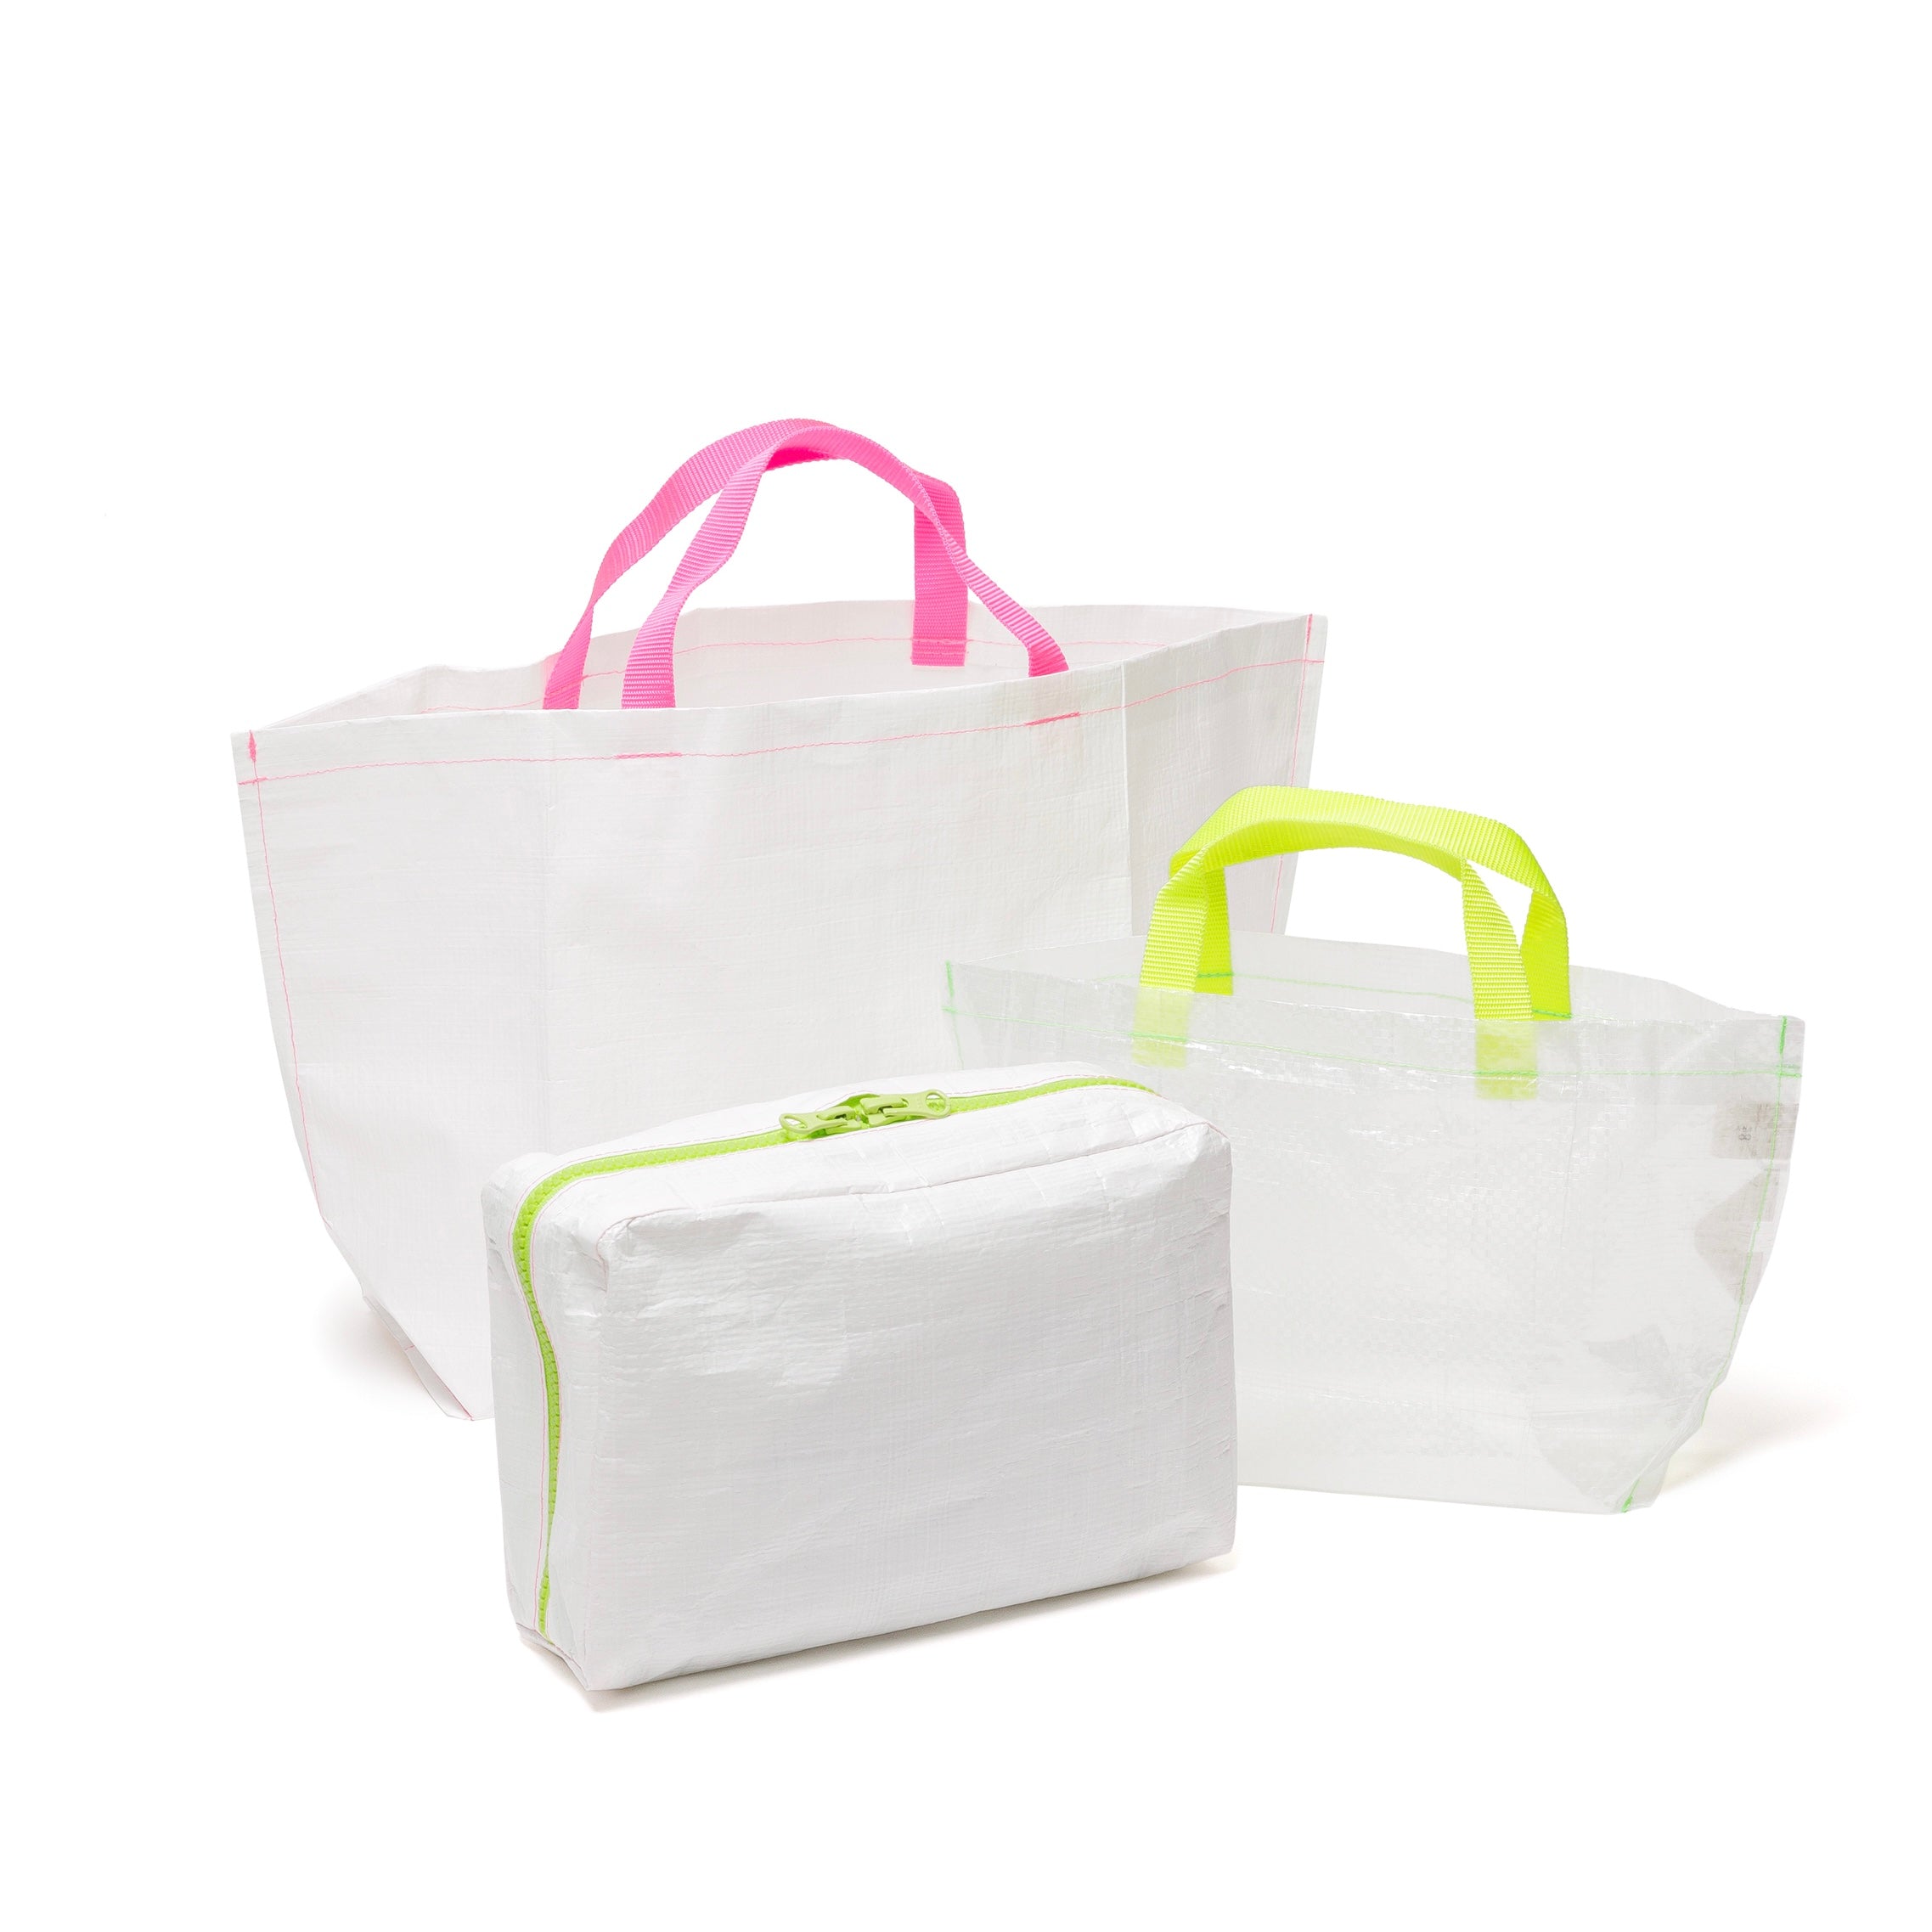 TOTE&POUCH Charity 3 piece set / MULTI-A-